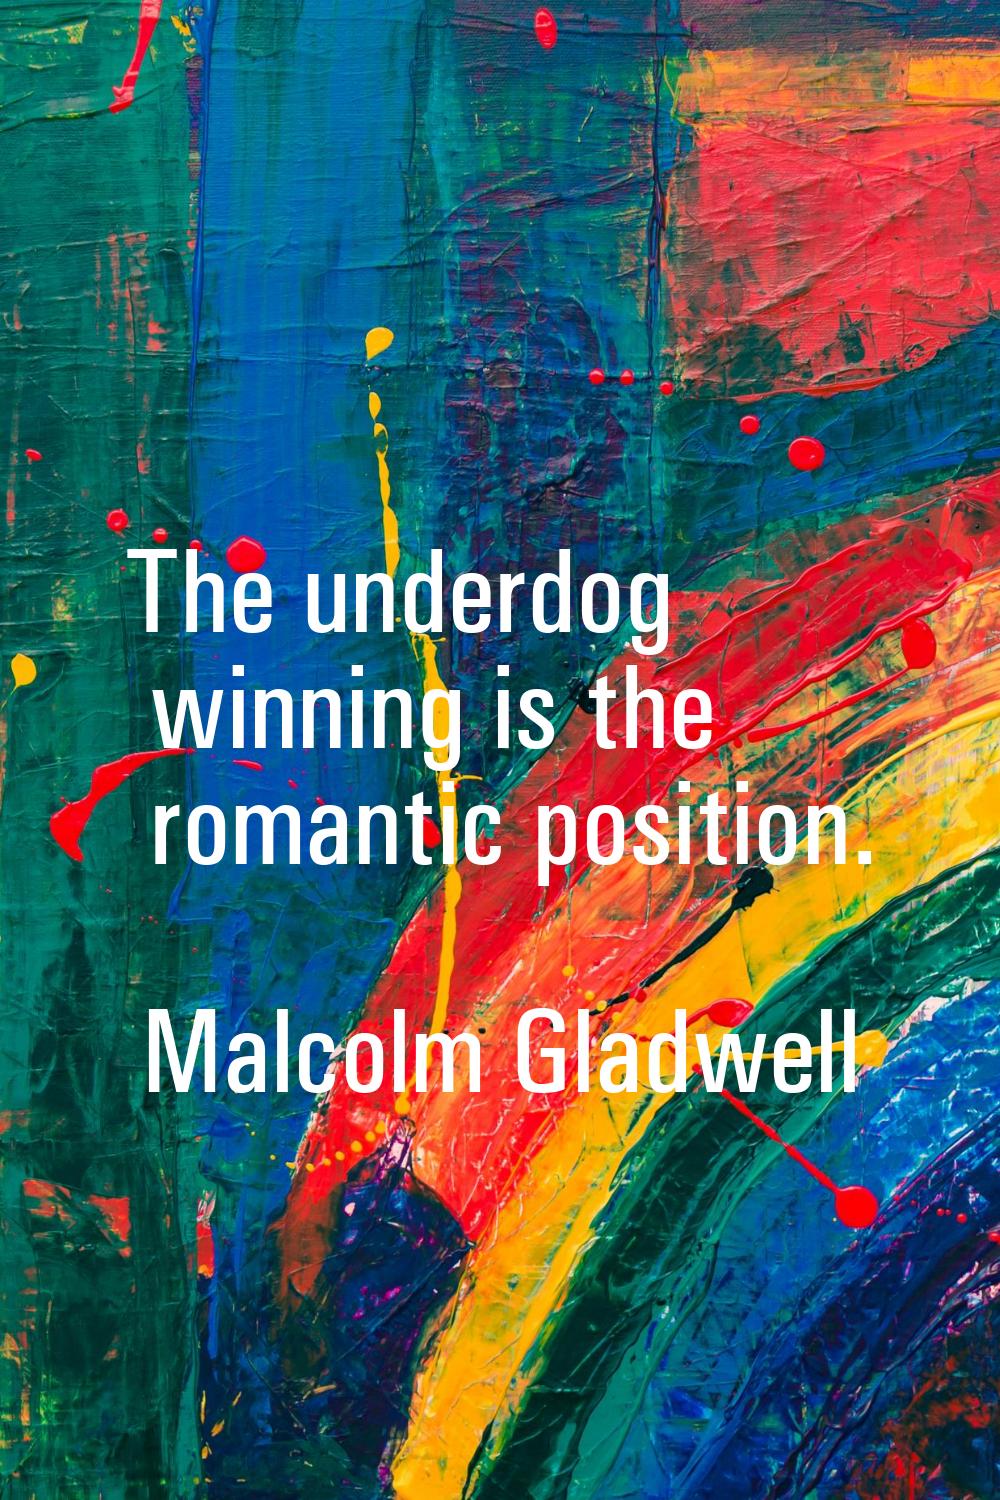 The underdog winning is the romantic position.